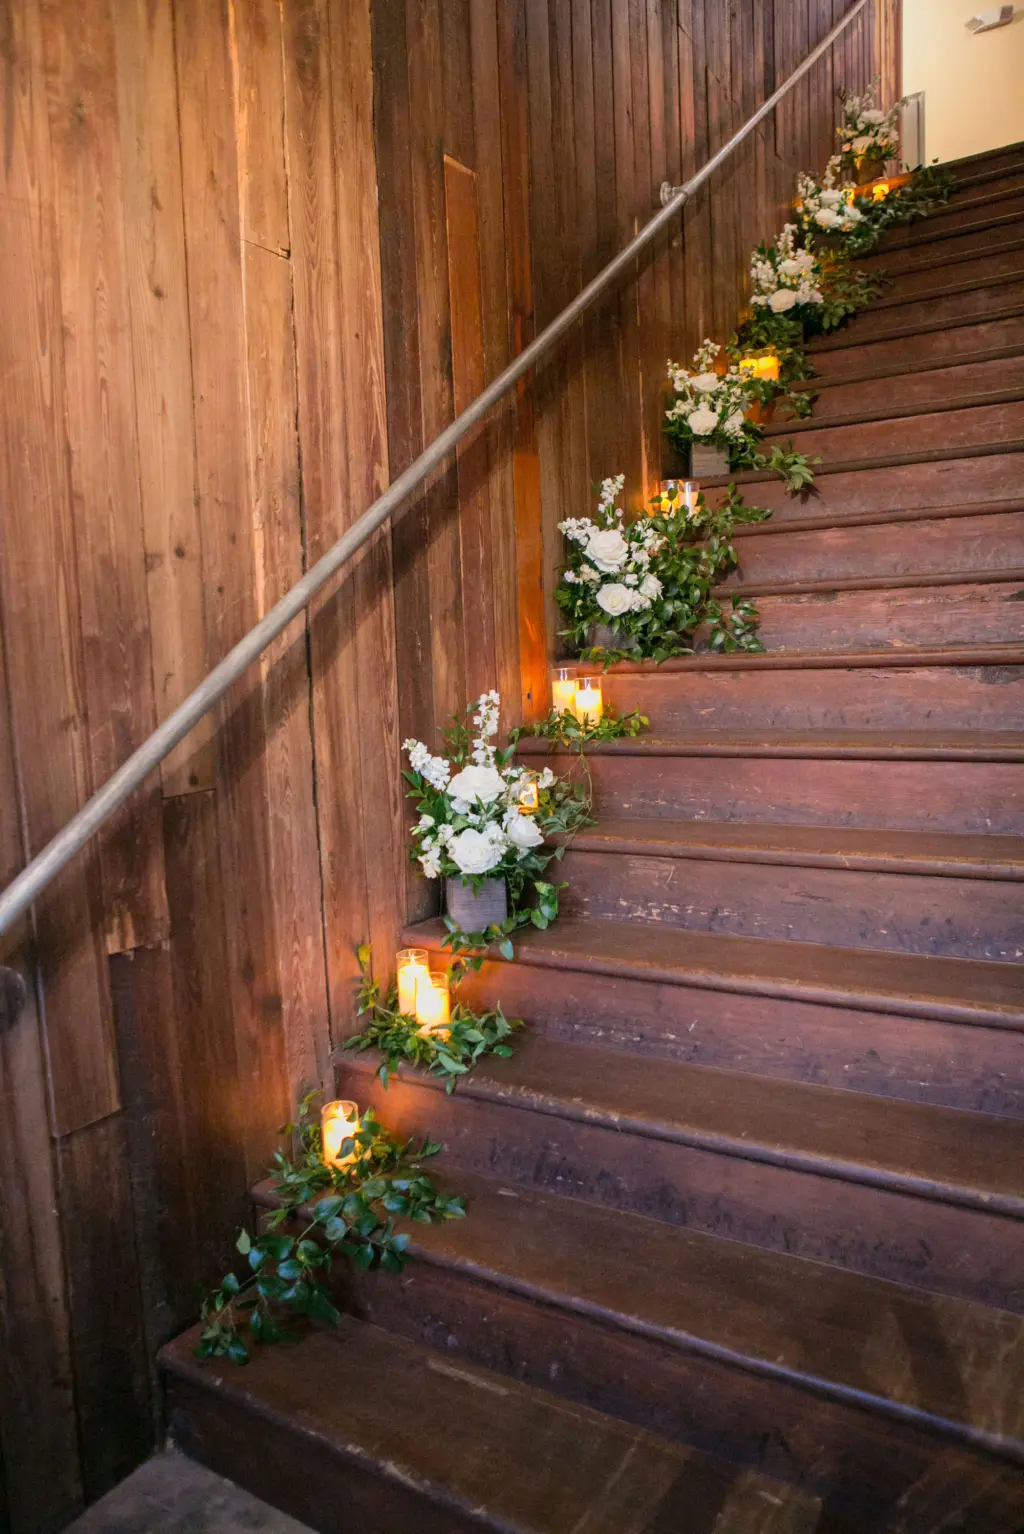 Candlelit Stairs Decor for Wedding Reception | Greenery, White Roses, and Stock Flowers